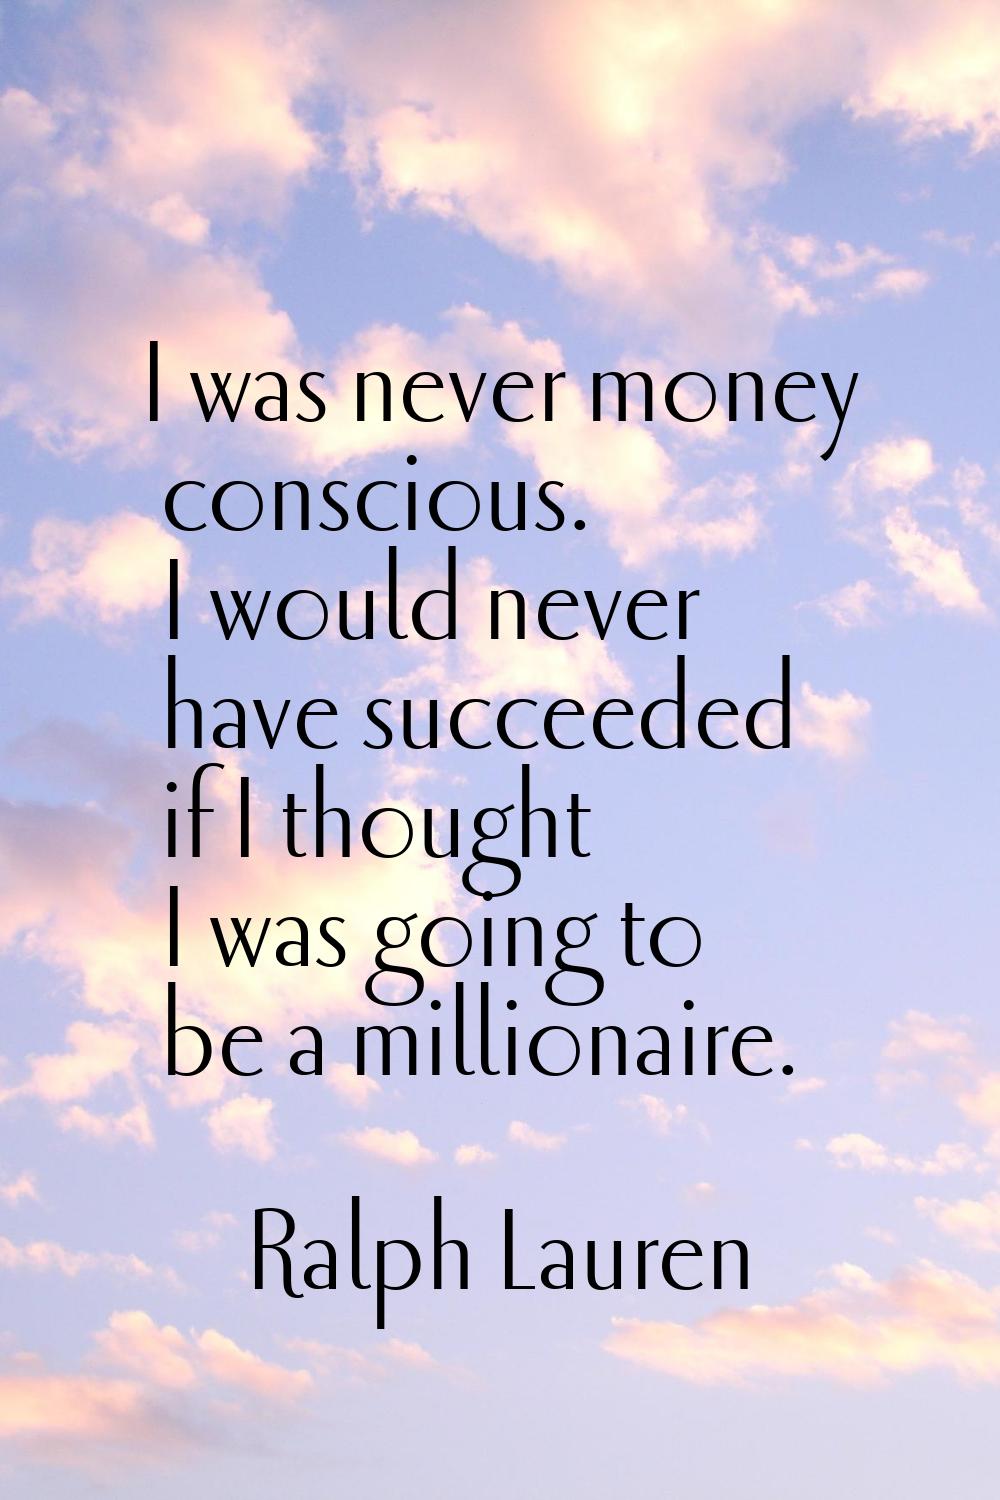 I was never money conscious. I would never have succeeded if I thought I was going to be a milliona